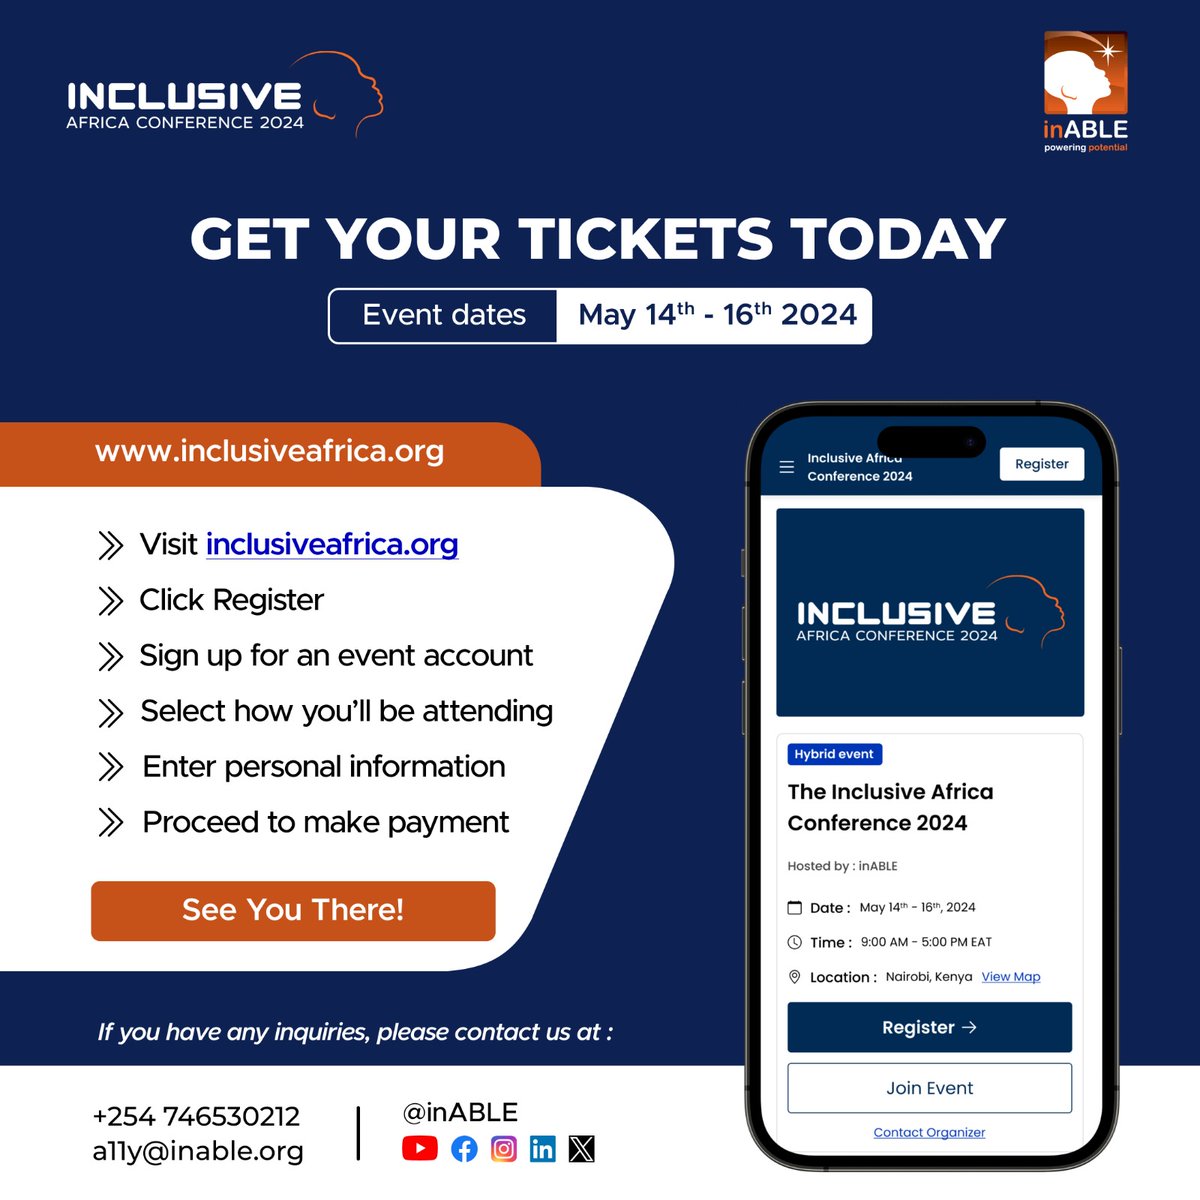 🎟️ Get Your Tickets Now! 🎟️ Join us from May 14th to 16th, 2024, in Nairobi, Kenya, at the 5th Inclusive Africa Conference for three days of insightful sessions, inspiring speakers, and networking opportunities.